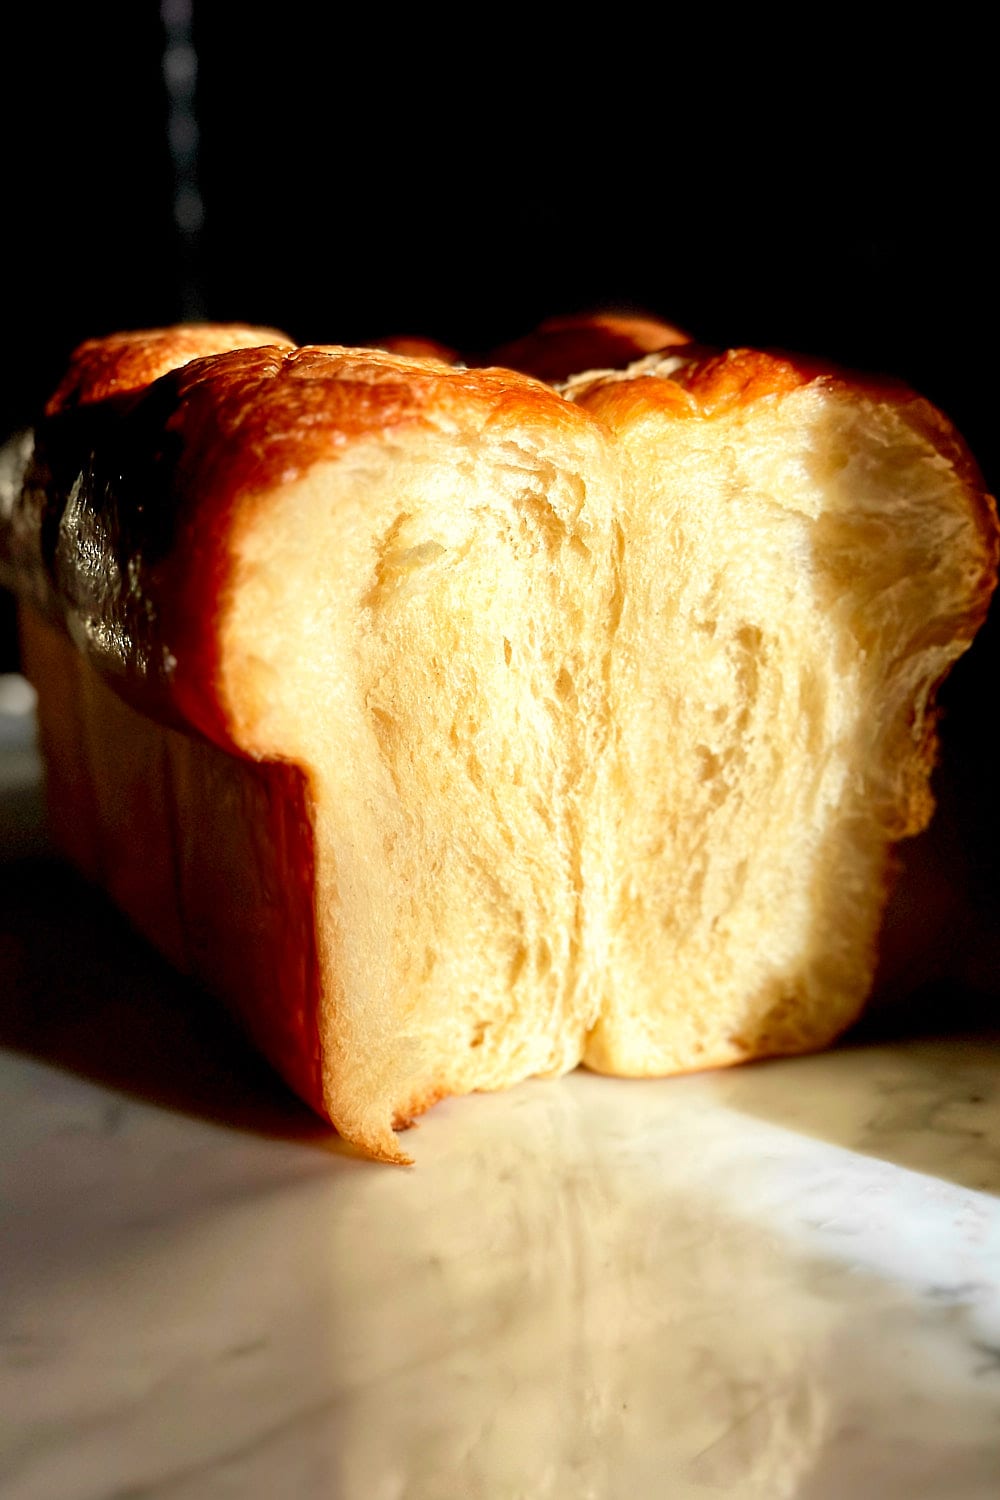 The soft crumb of a freshly baked sourdough brioche.